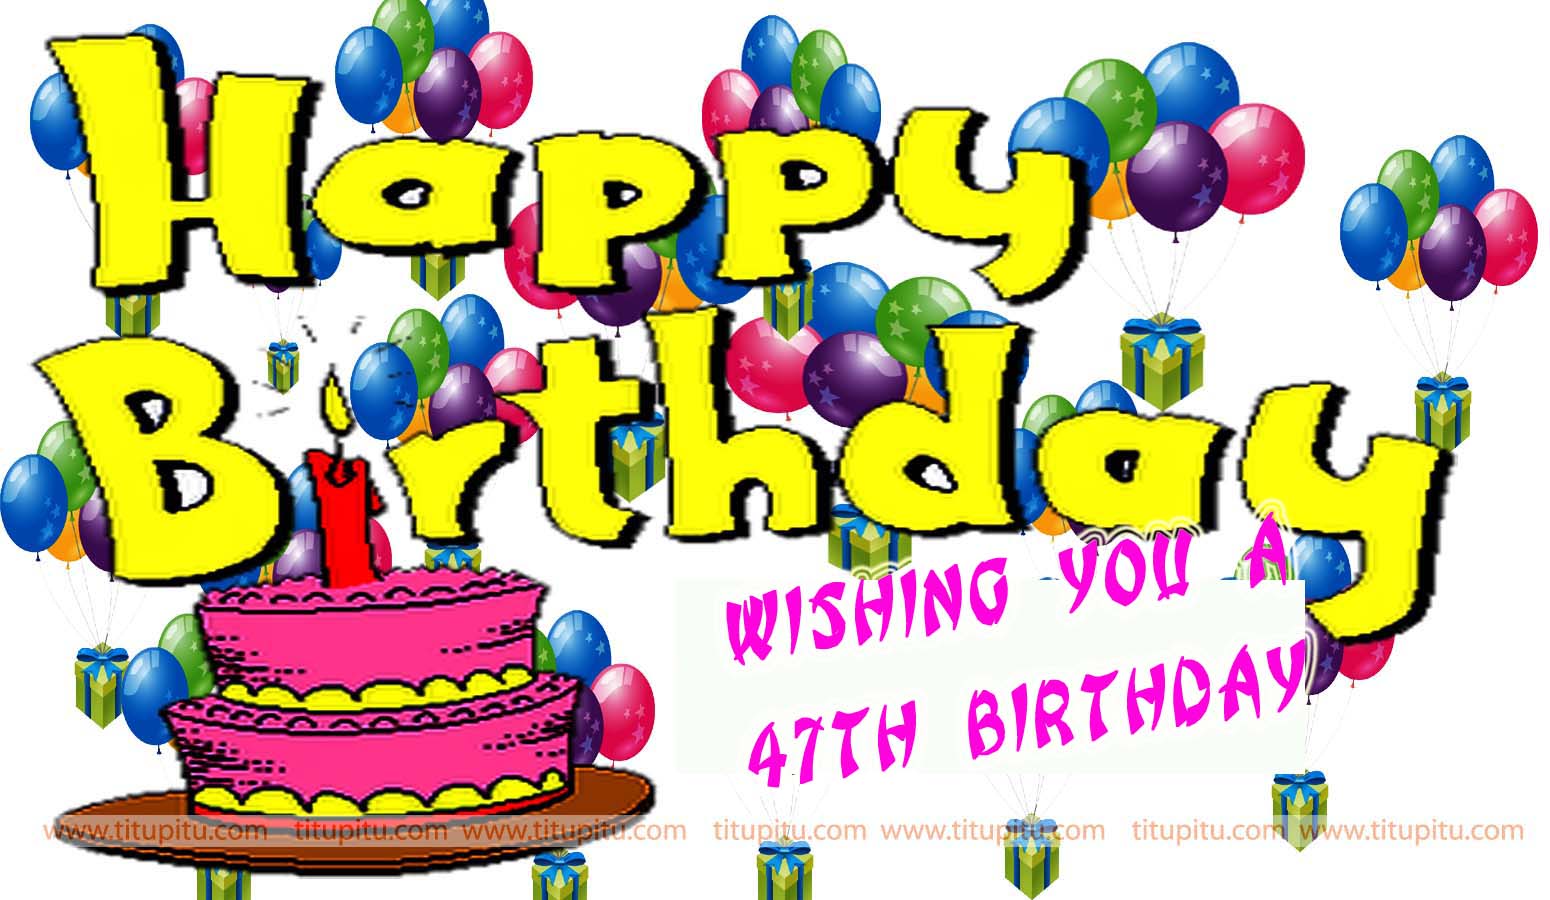 47th birthday wishes message and wallpaper for everyone | Haryanvi ...